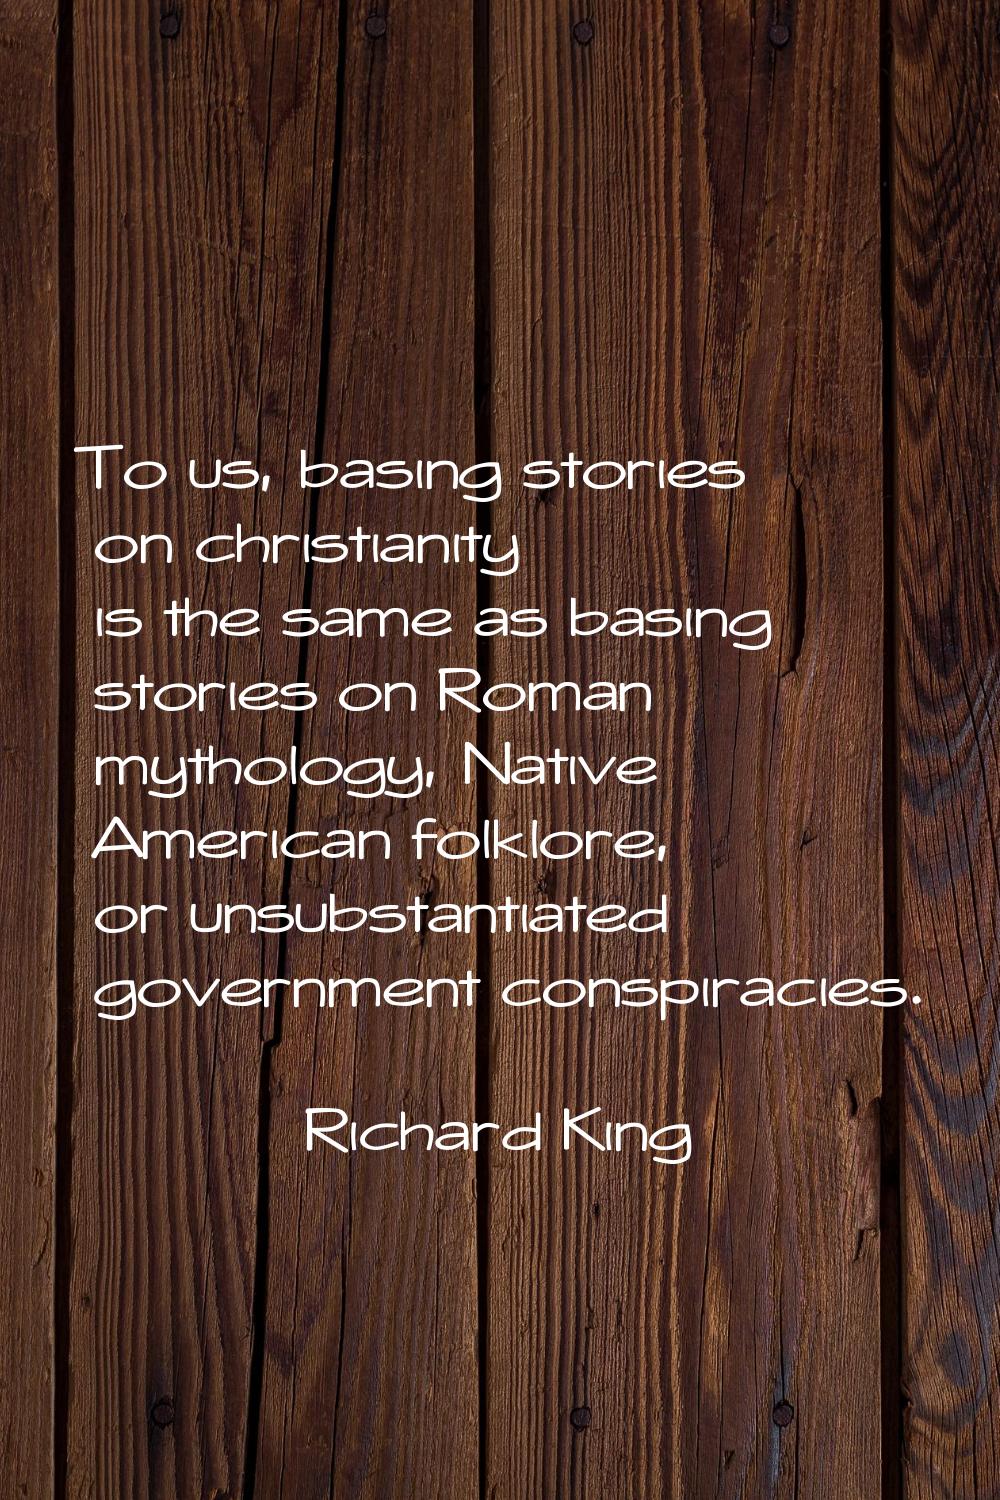 To us, basing stories on christianity is the same as basing stories on Roman mythology, Native Amer